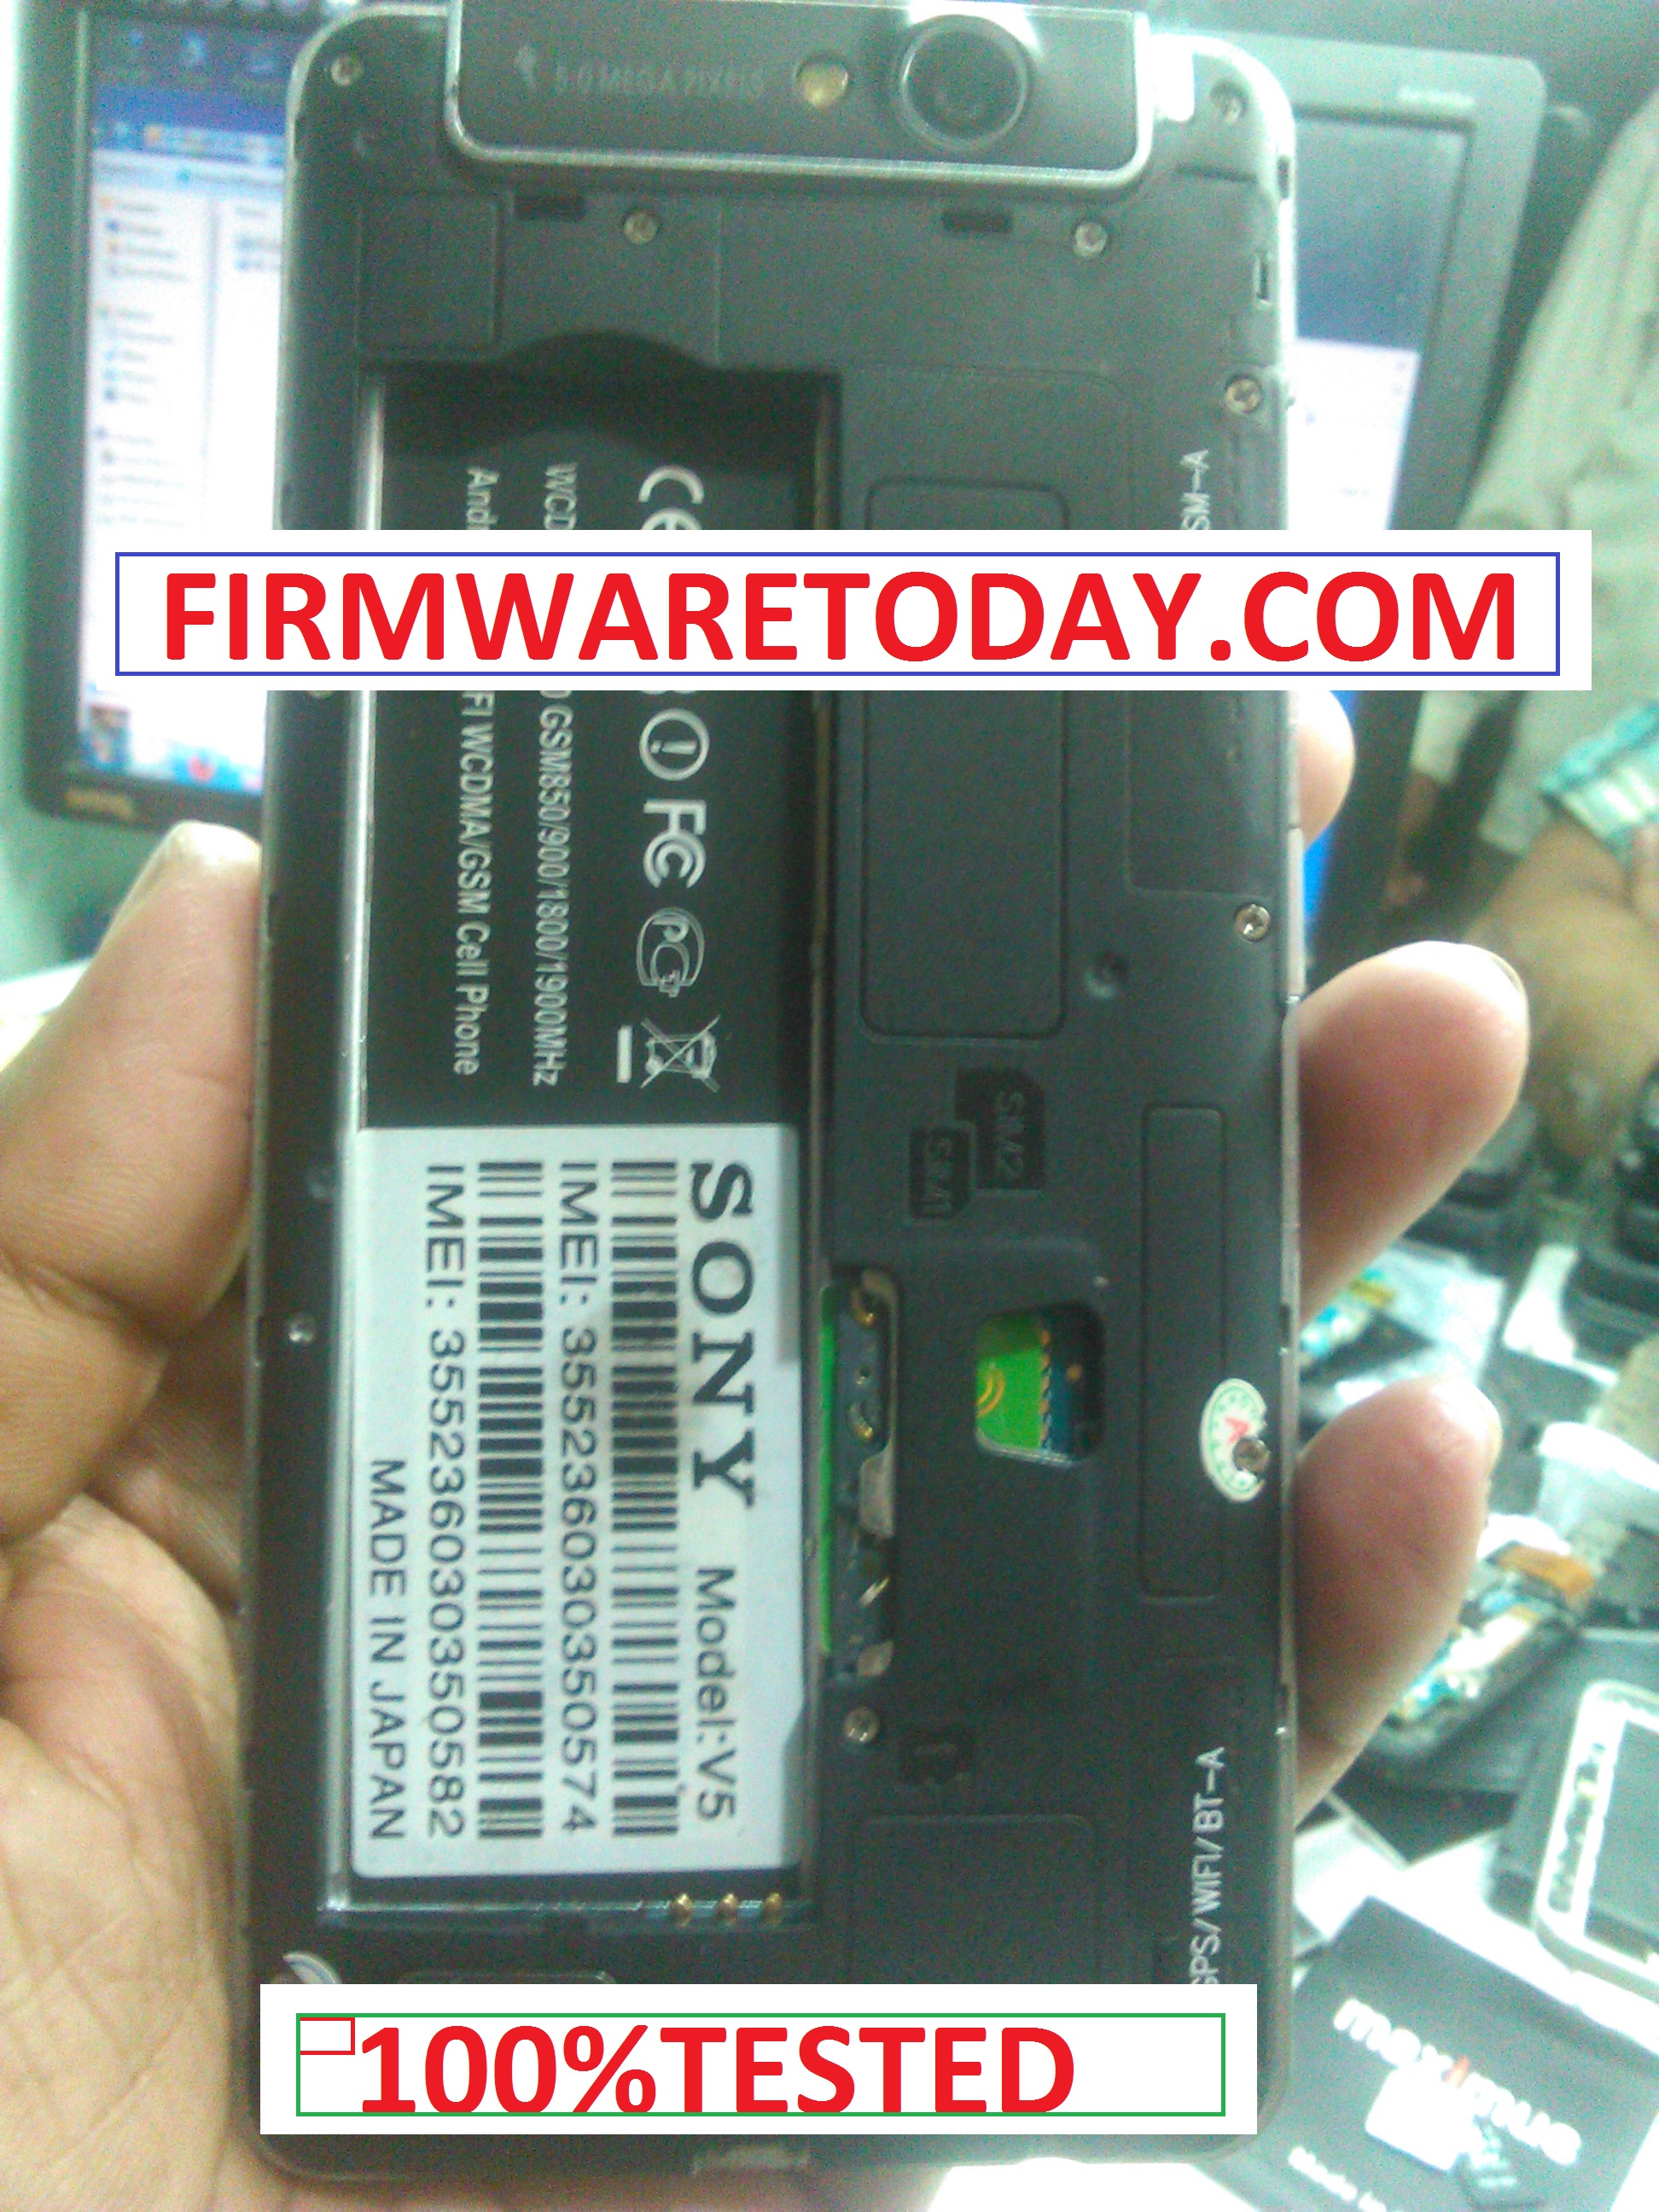 SONY V5 FLASH FILE FREE 2ND UPDATE OFFICIAL FIRMWARE (6572) 1000%TESTED BY FIRMWARETODAY.COM